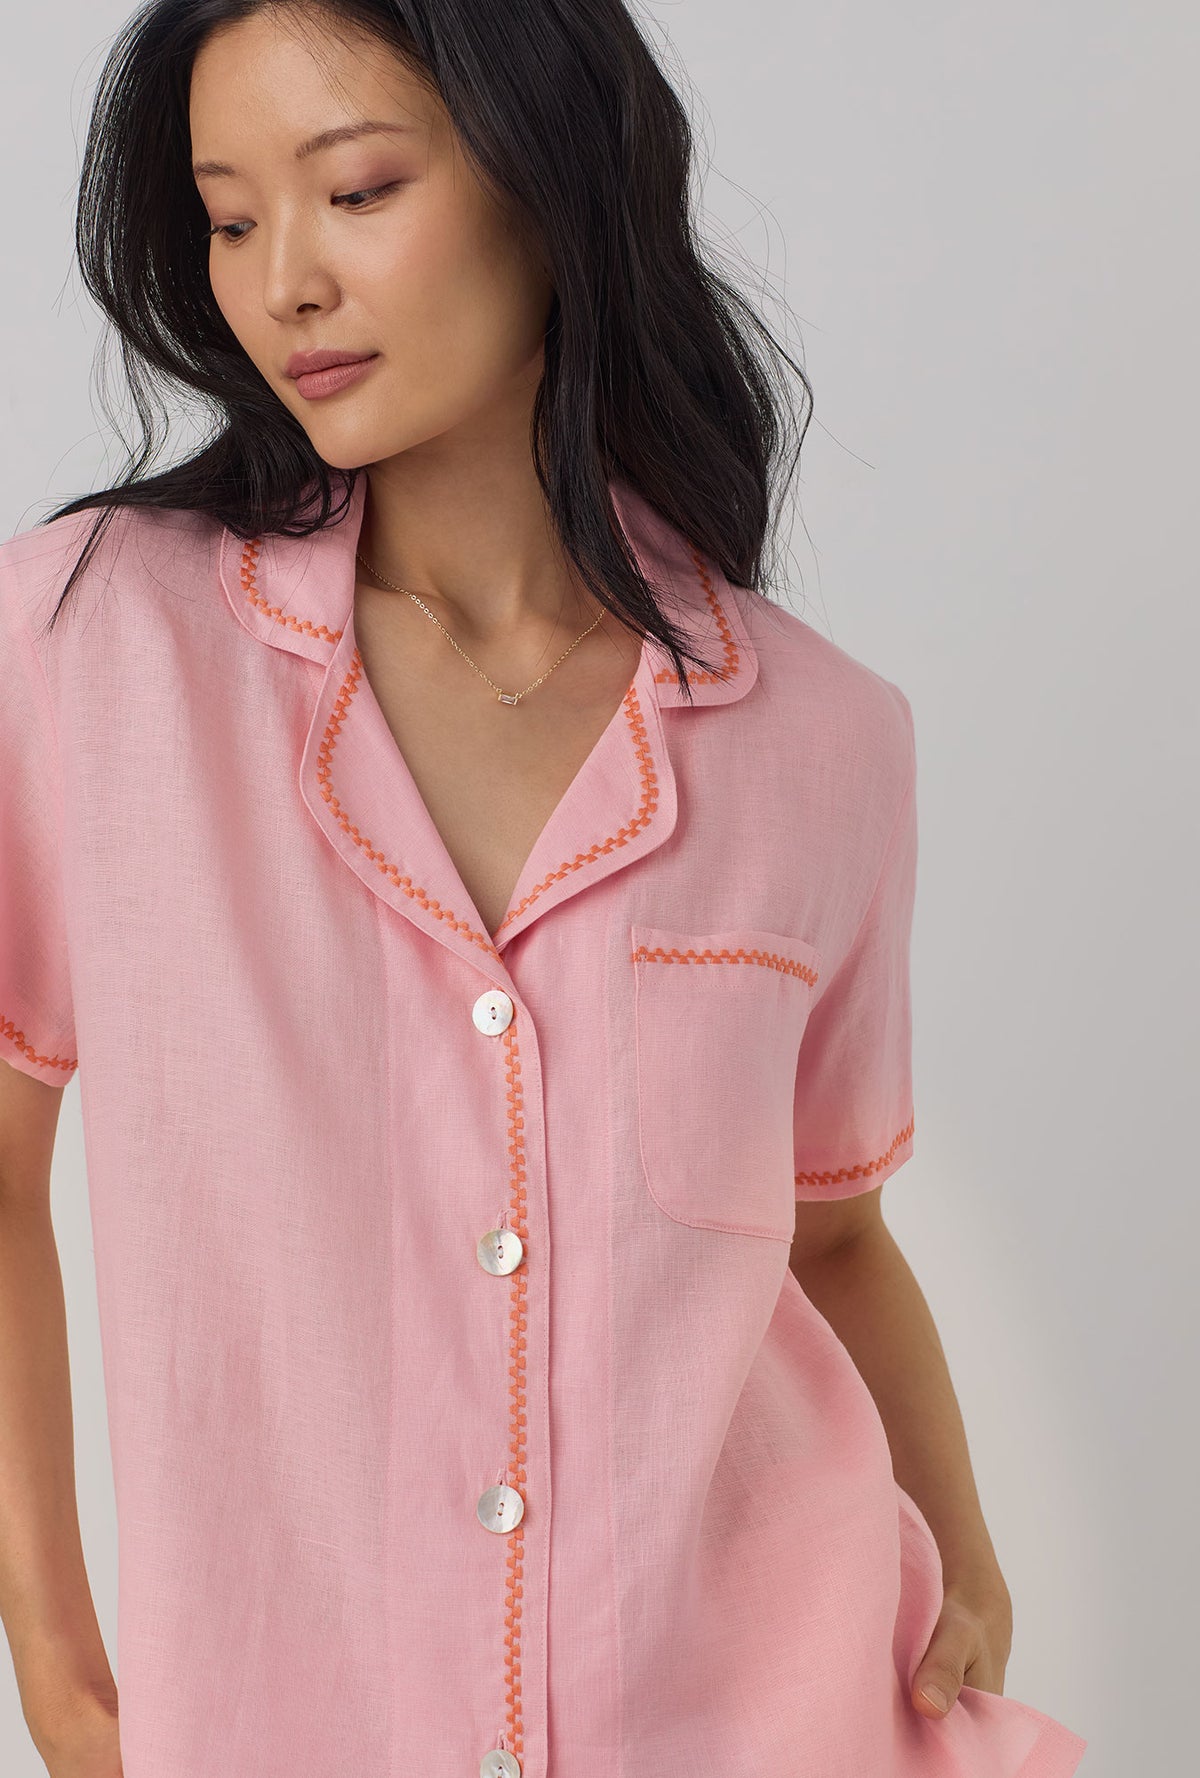 A lady wearing pink Short Sleeve Classic Shorty Woven Linen PJ Set with Orchid Pink print.